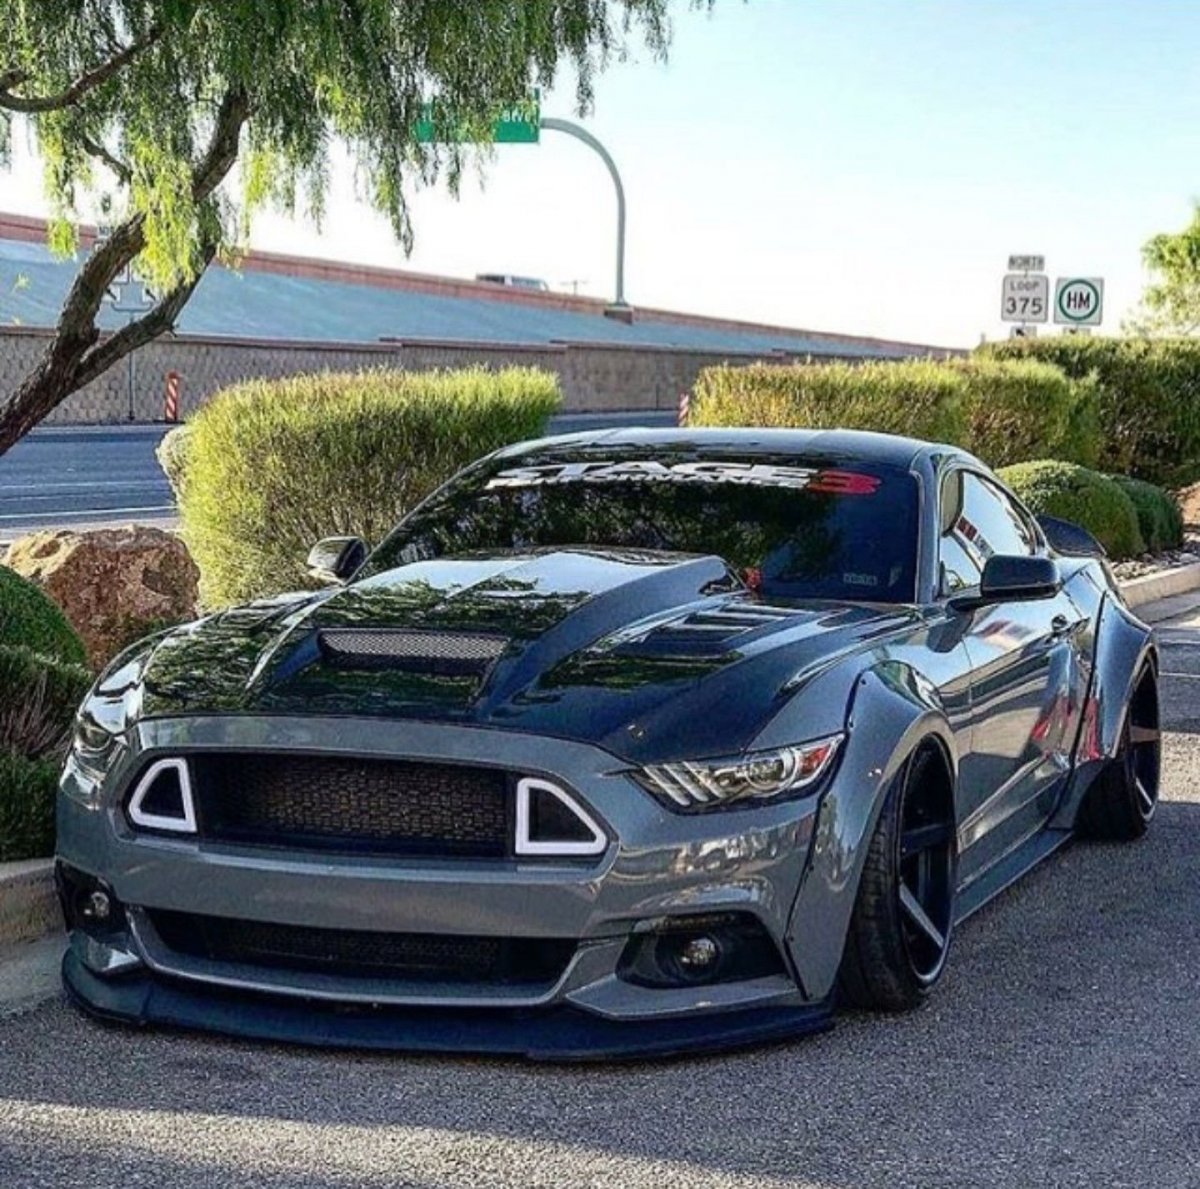 Ford Mustang Shelby gt350/350r